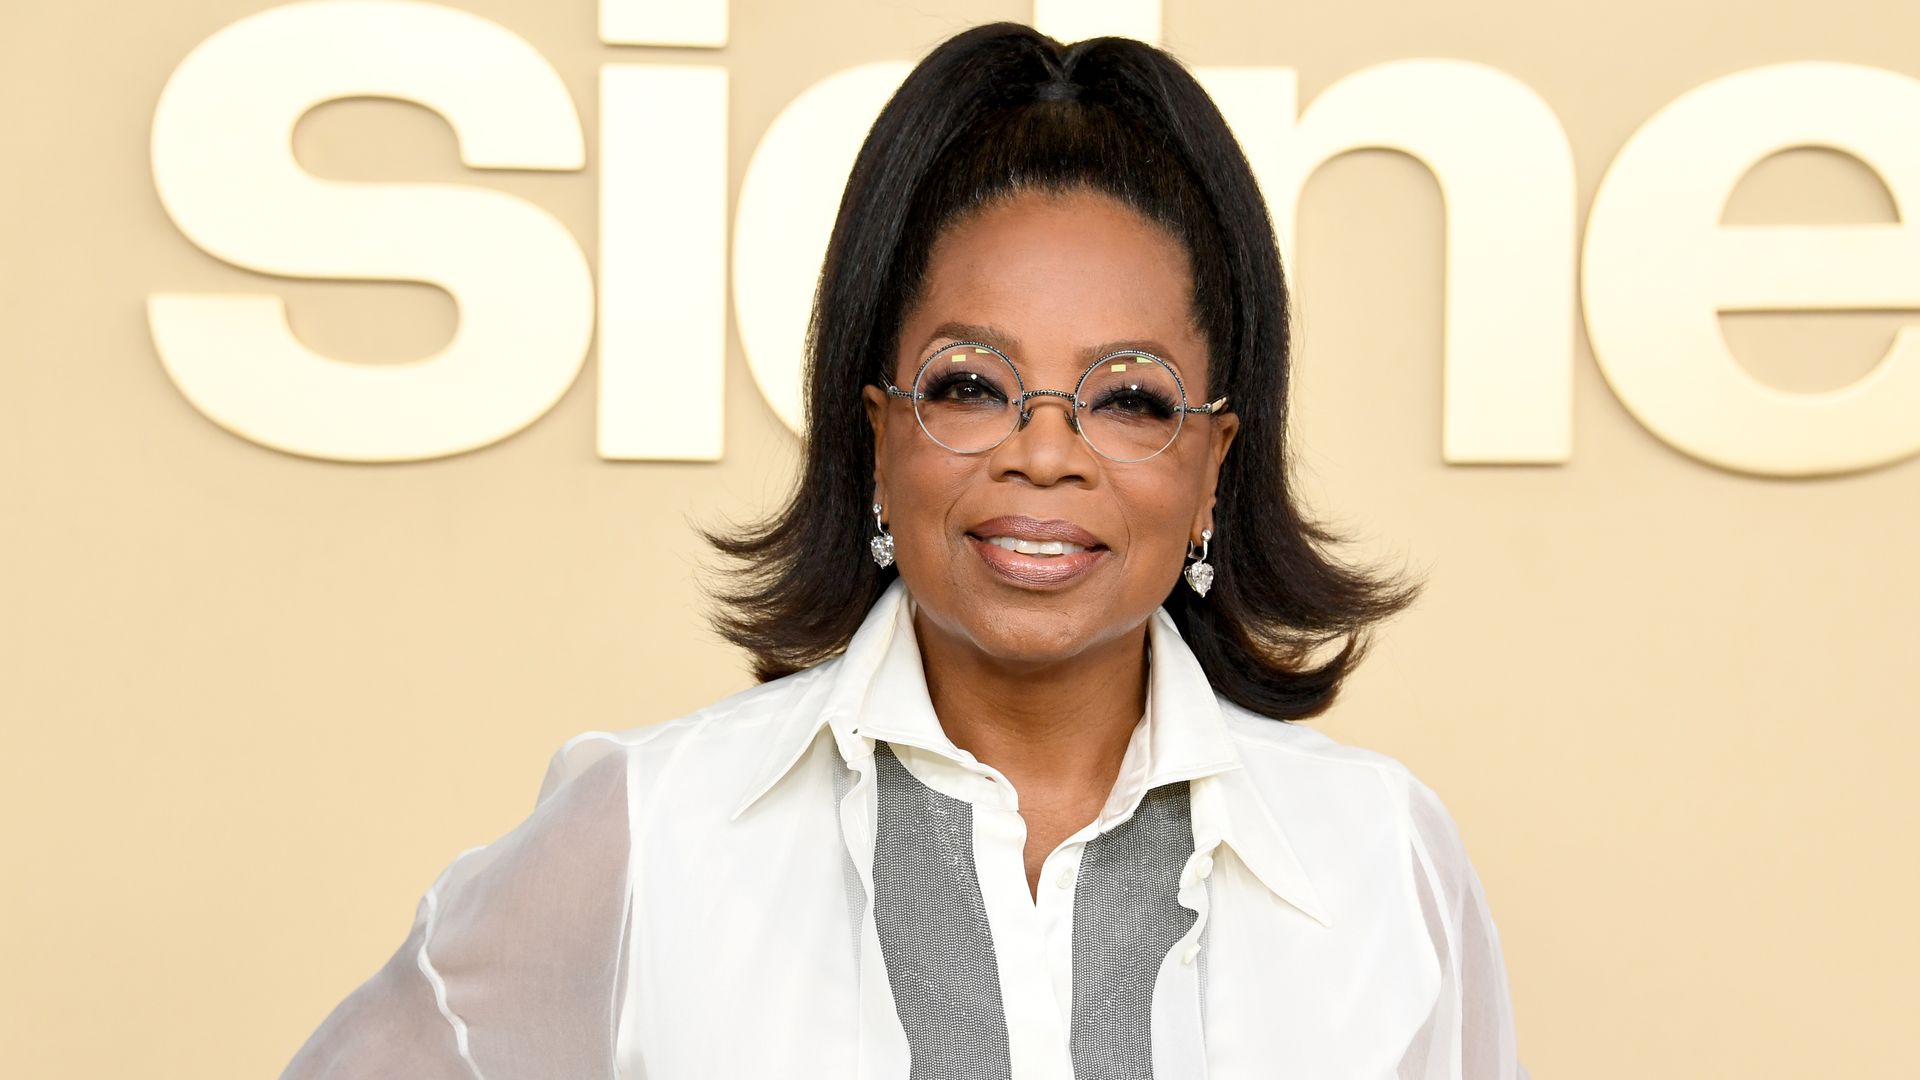 Oprah Winfrey attends the premiere of Apple TV +'s "Sidney" at the Academy Museum of Motion Pictures on September 21, 2022 in Los Angeles, California. 